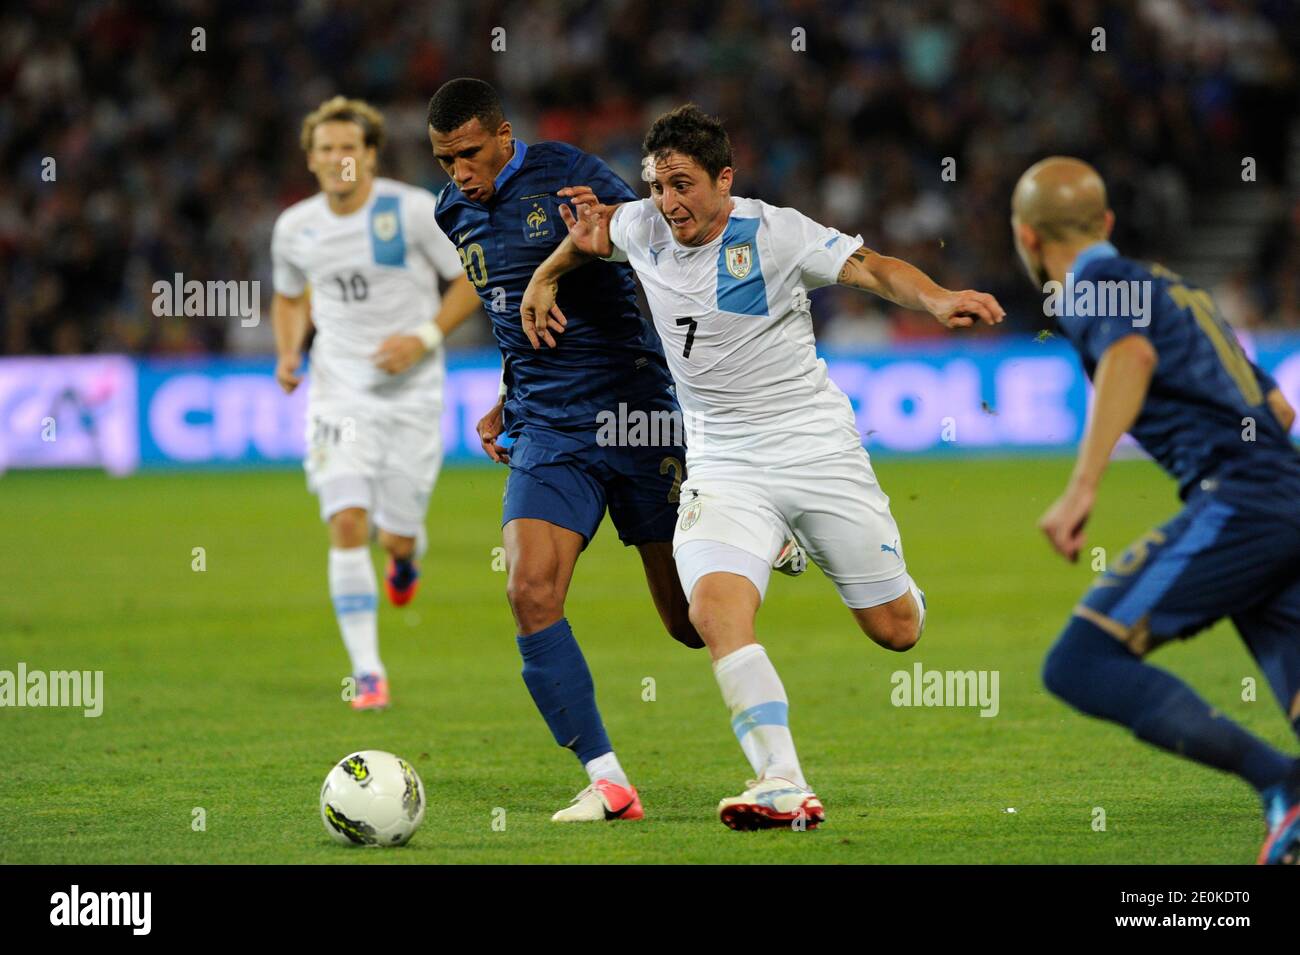 France's Etienne Capoue battling Uruguay's Cristian Rodríguez during a friendly soccer match, France vs Uruguay in Le Havre, France, on August 15th, 2012. France and Uruguay drew 0-0. Photo by Henri Szwarc/ABACAPRESS.COM Stock Photo